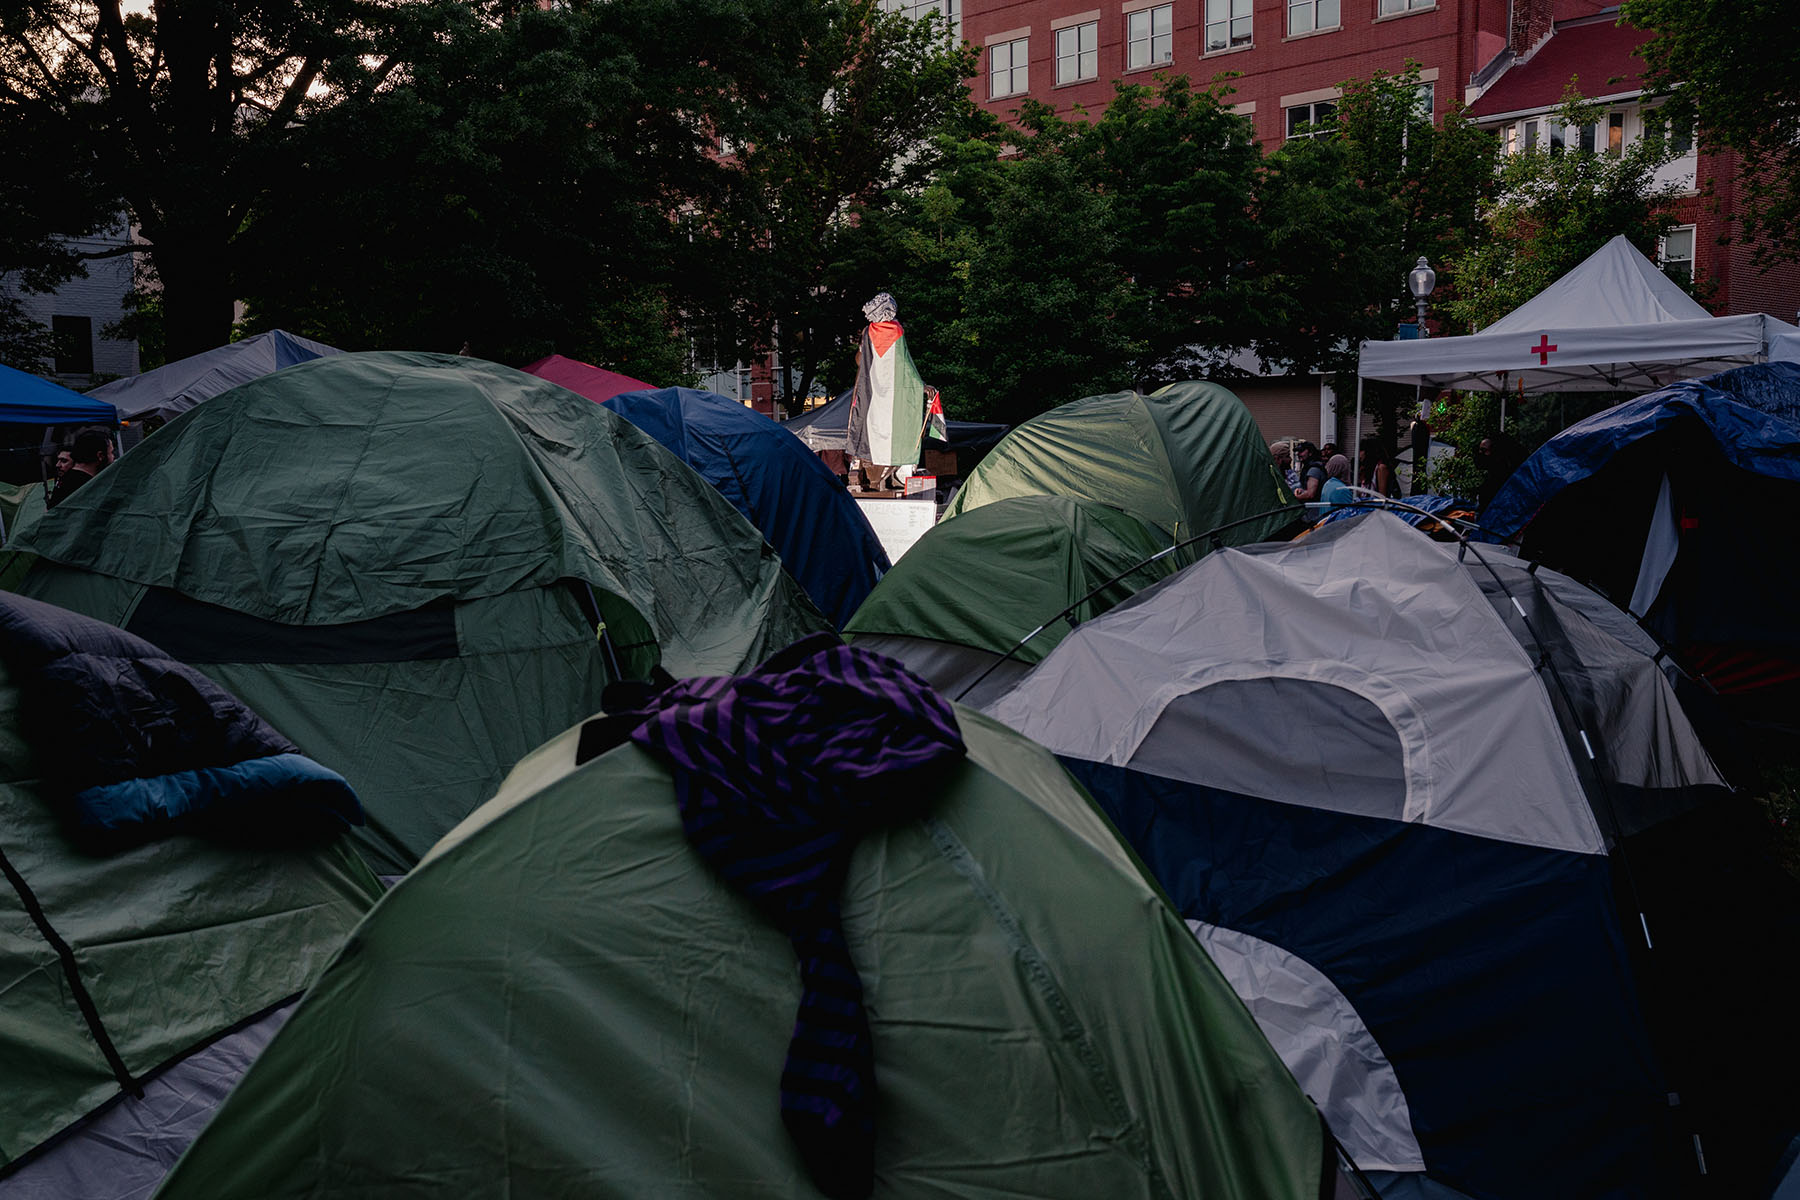 Tents are seen on the George Washington University campus.